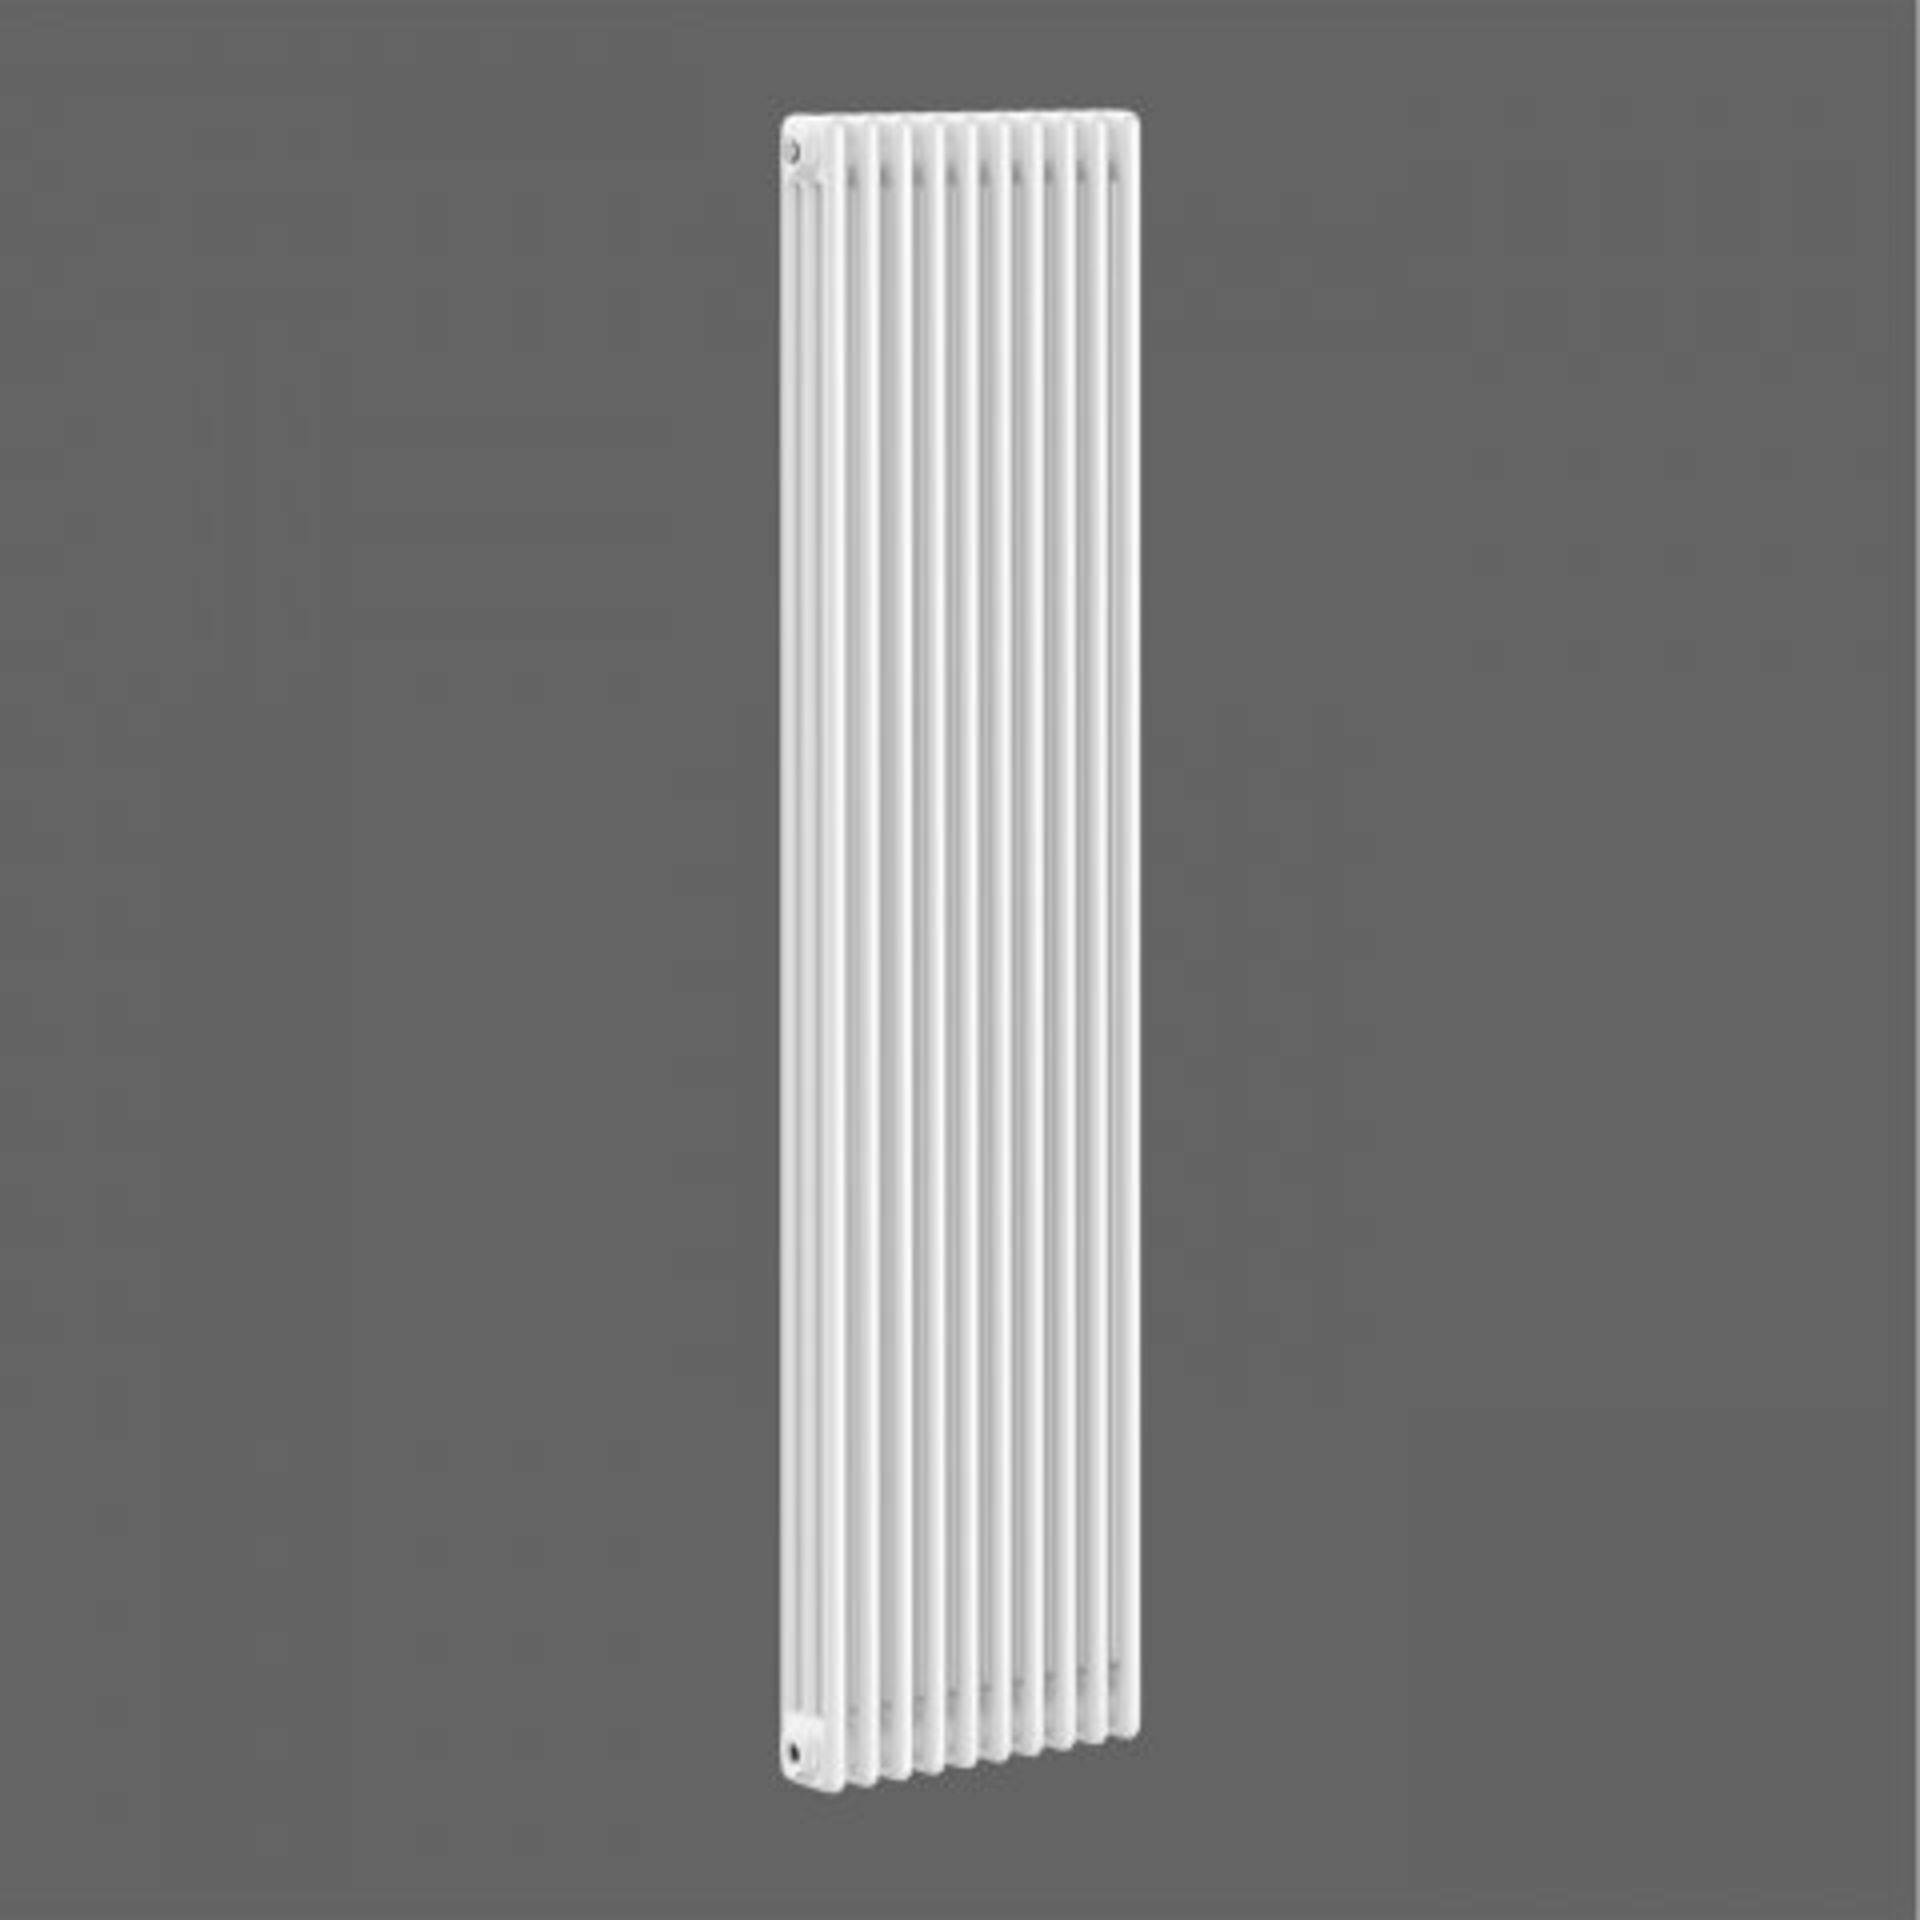 (P5) 1800x468mm White Triple Panel Vertical Colosseum Traditional Radiator. RRP £599.99. Classic - Image 2 of 3